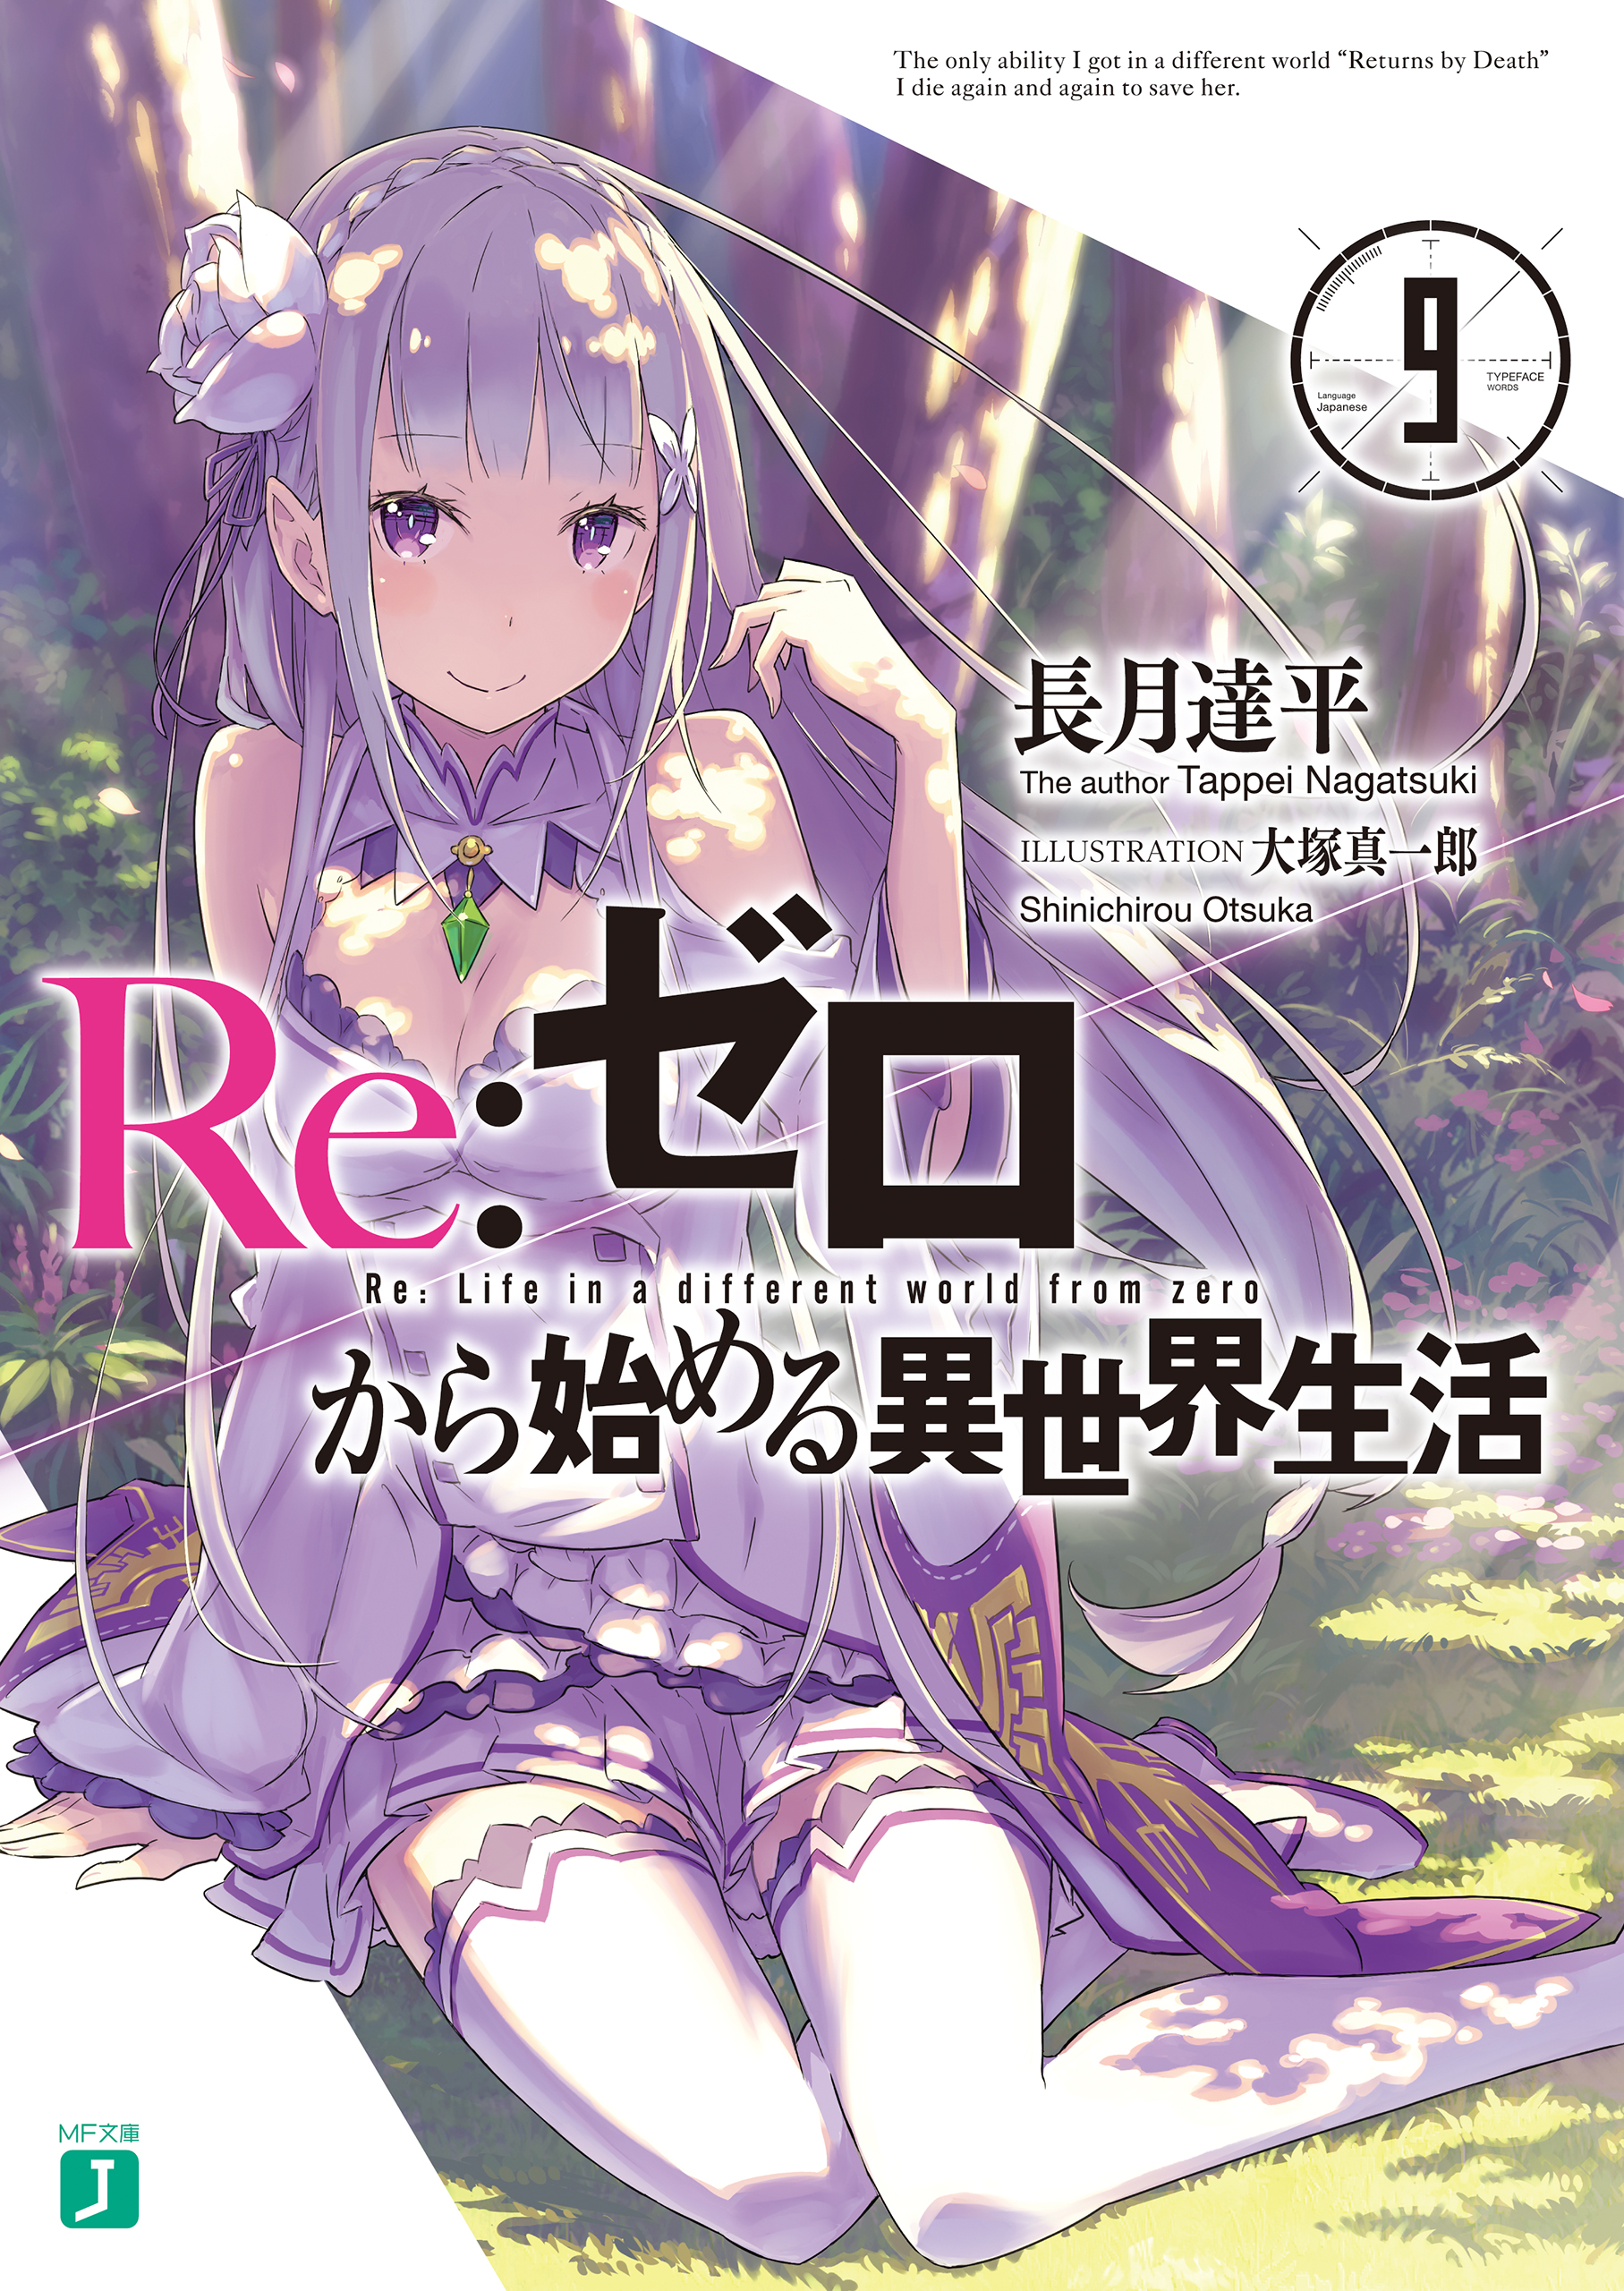 How Re:Zero Changed from Light Novel to Anime - Adapt or Die 